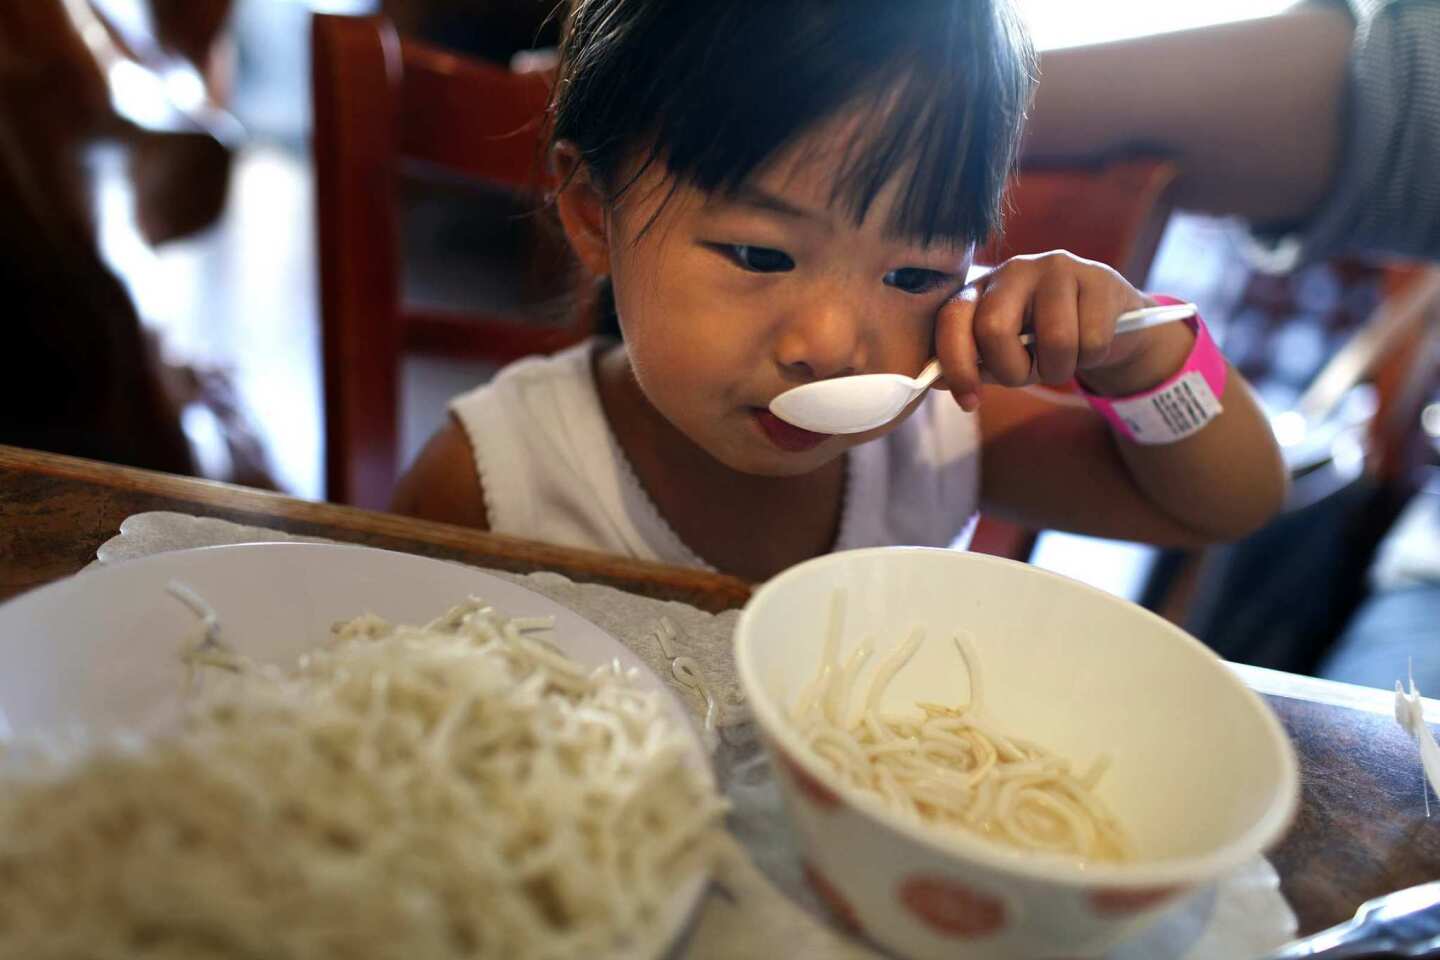 Quan Vy Da restaurant in Westminster specializes in cuisine from the central Vietnam area. Savannah Hoang, 2, of Westminster, scoops some noodles into her mouth during lunch.